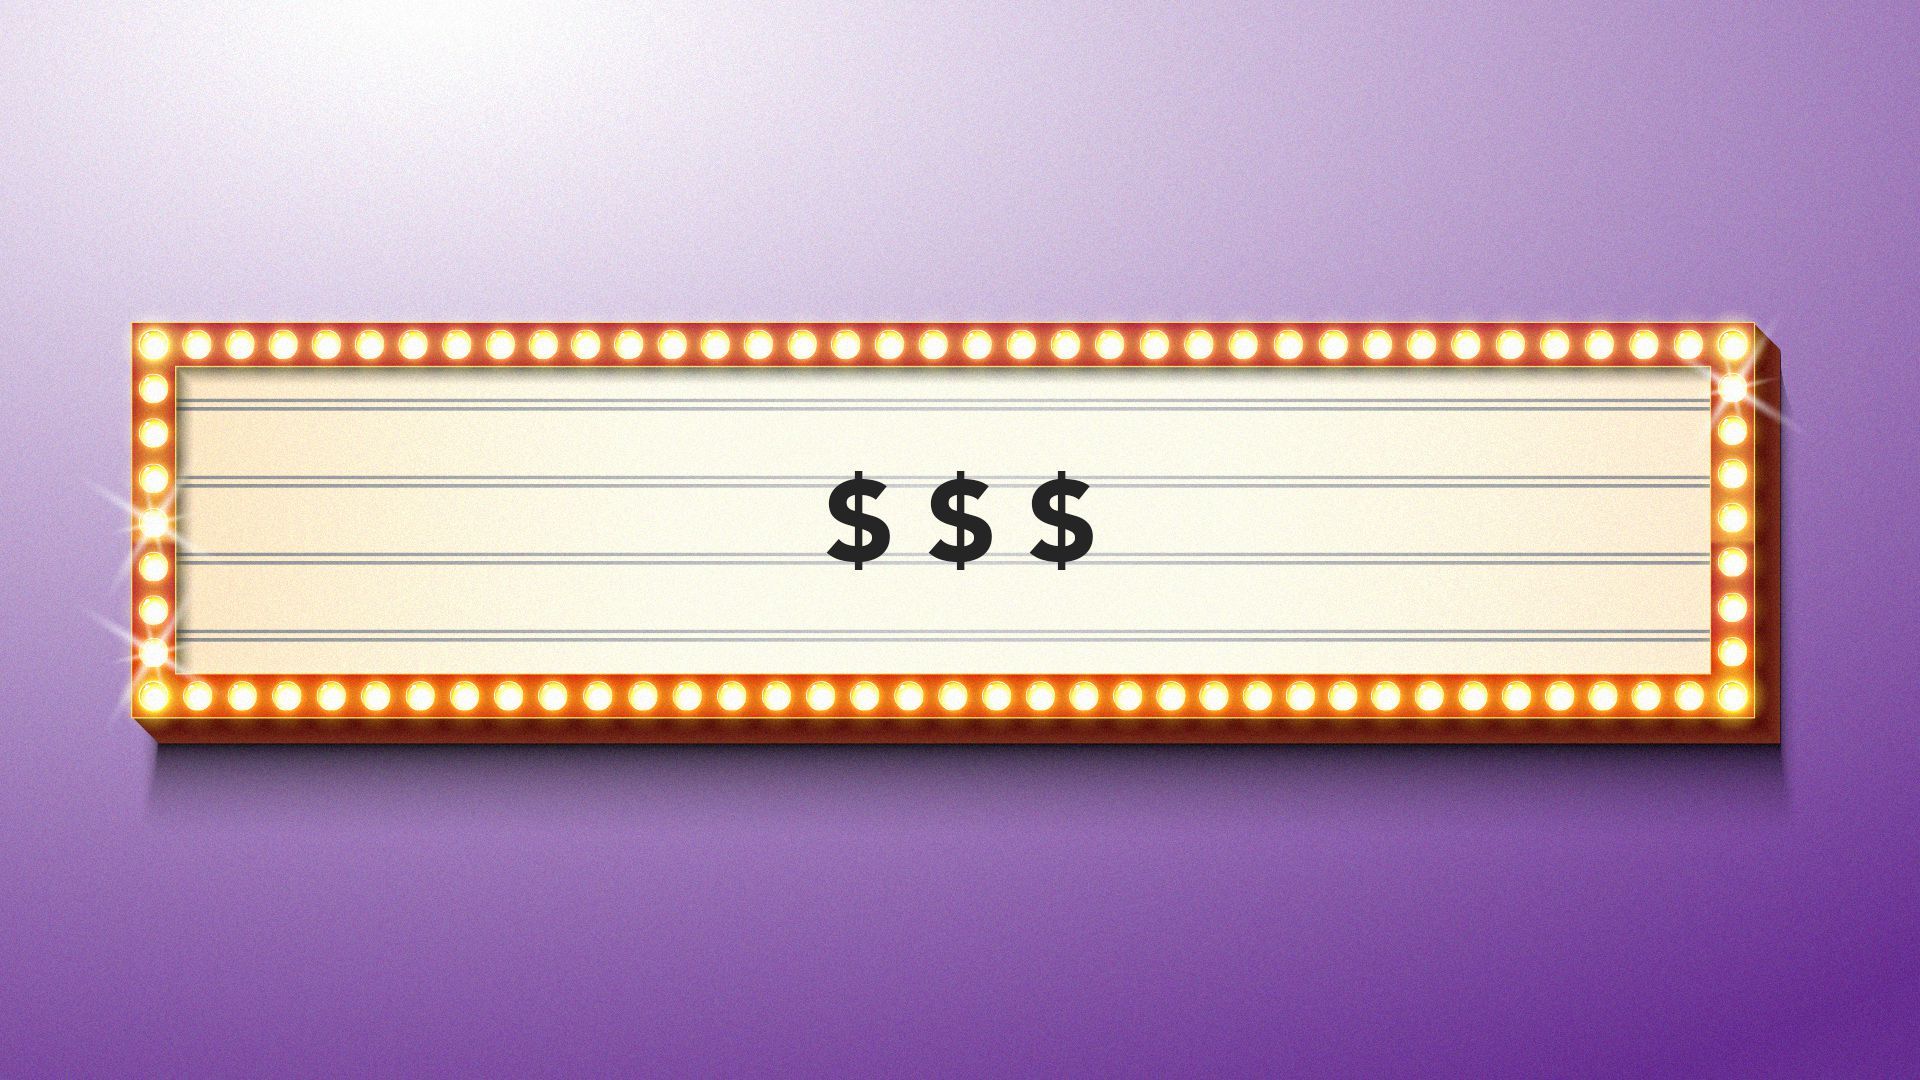 Illustration of a theater marquee with dollar signs.